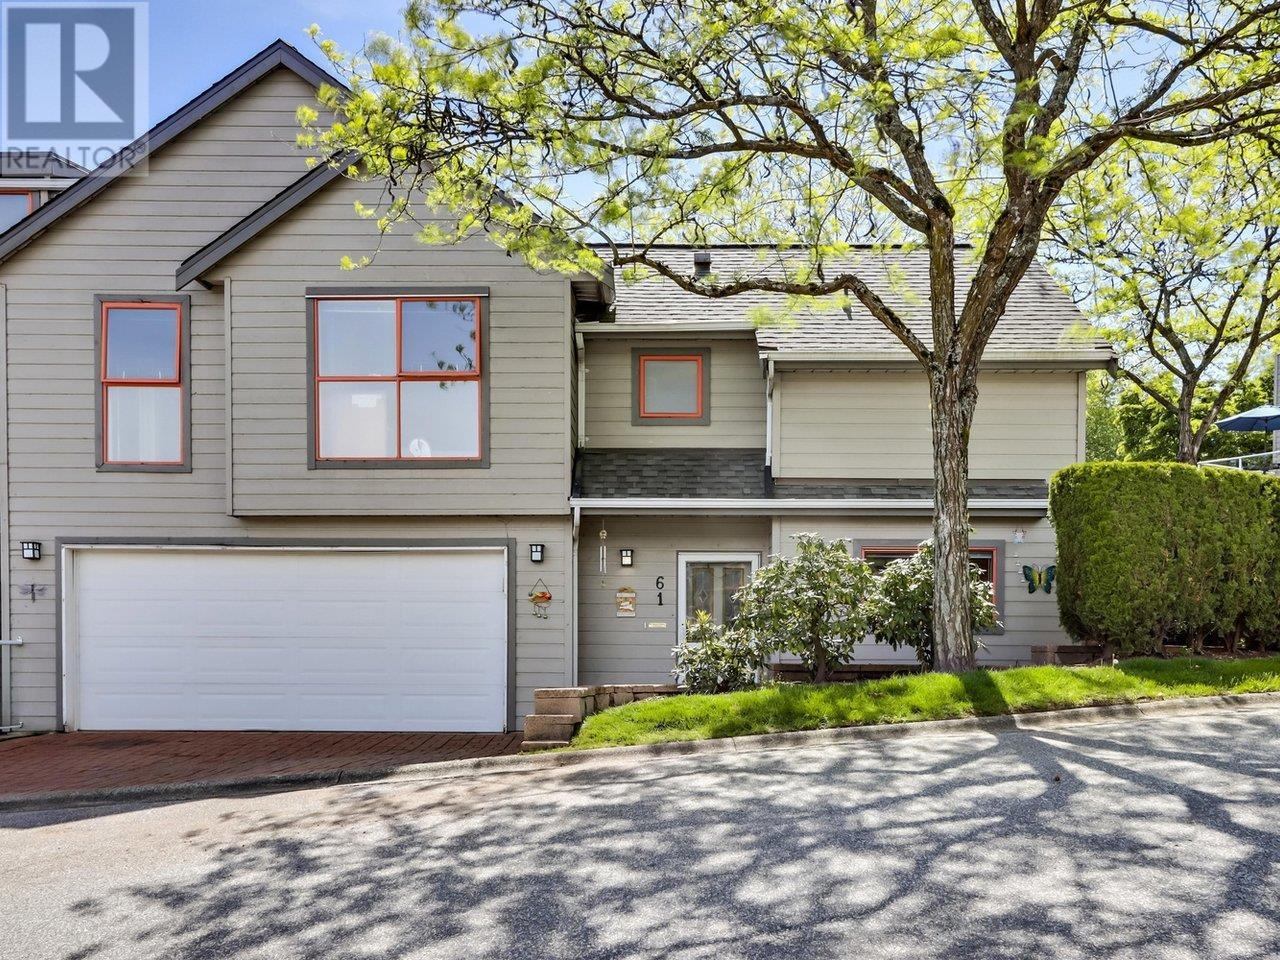 61 323 GOVERNORS COURT, new westminster, British Columbia